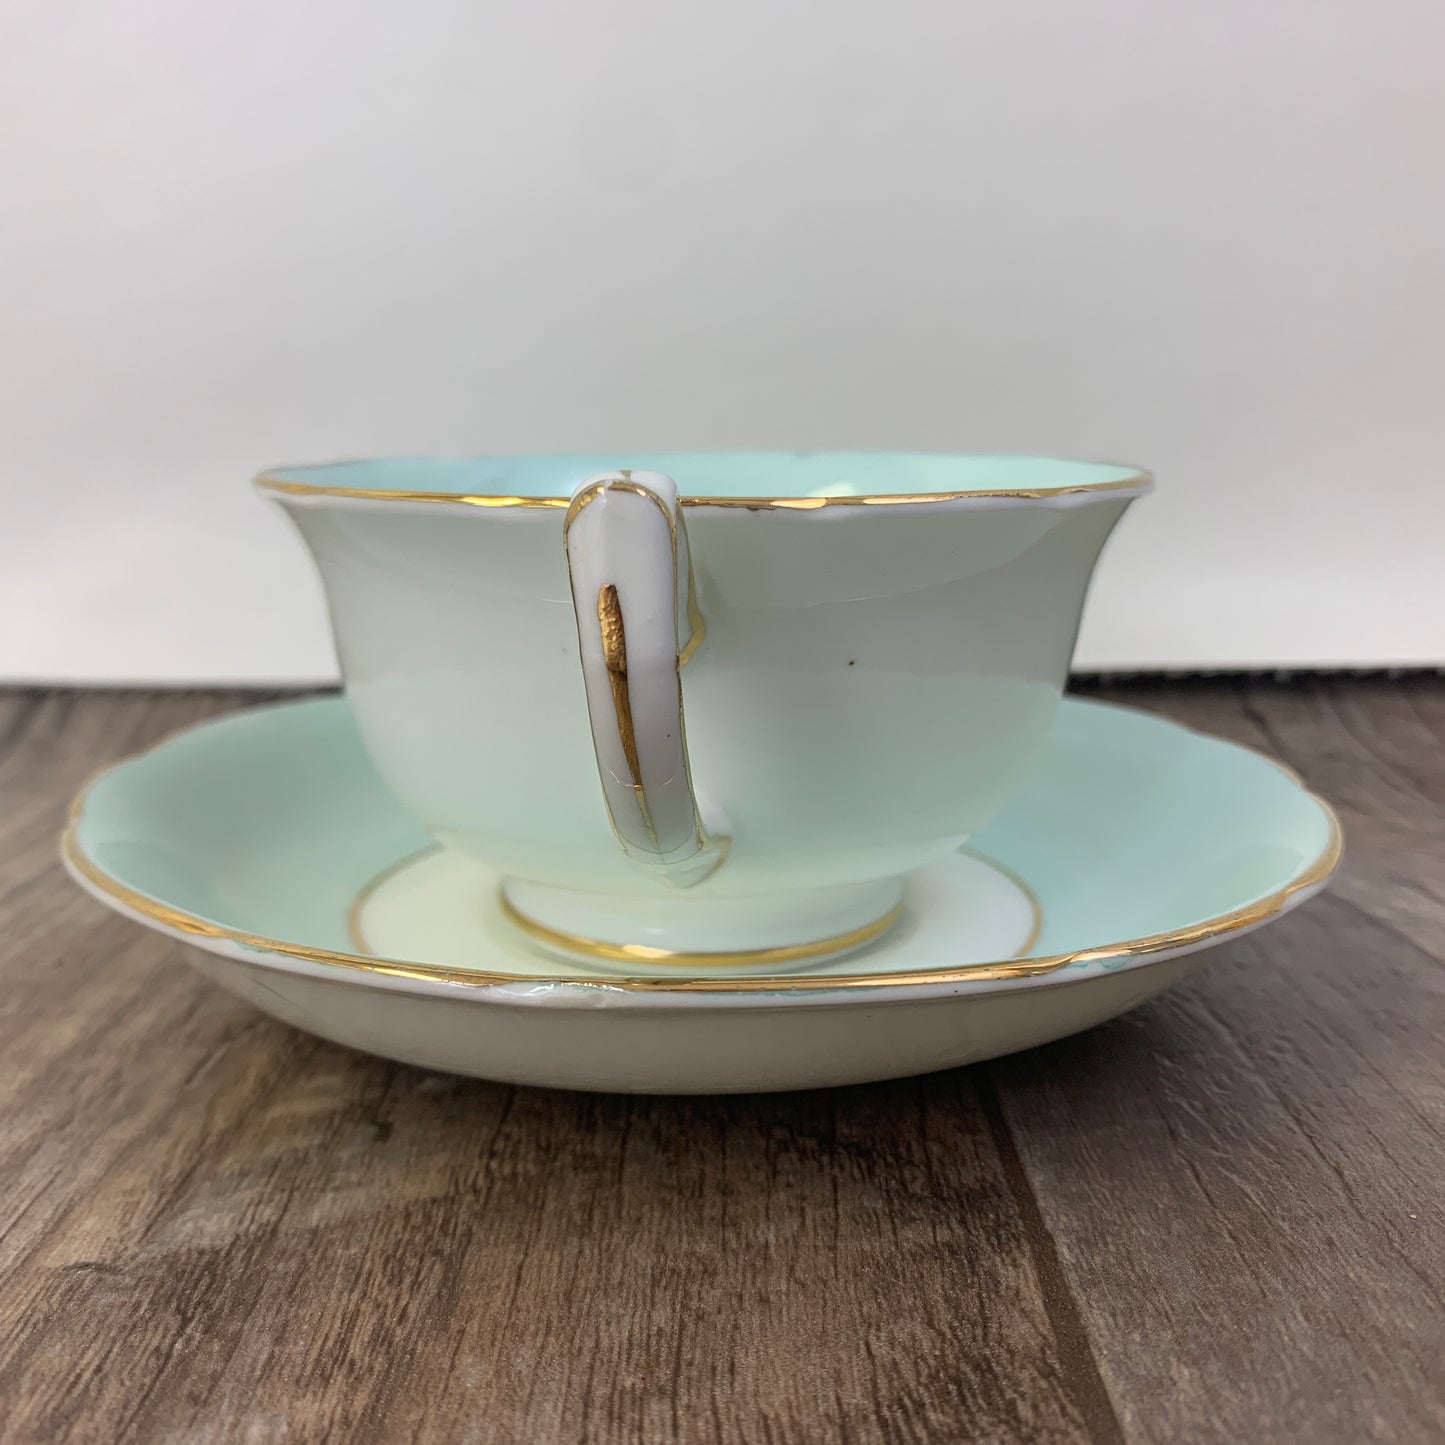 Wide Mouth Tea Cup. Pale Green and White Hammersley Vintage Teacup